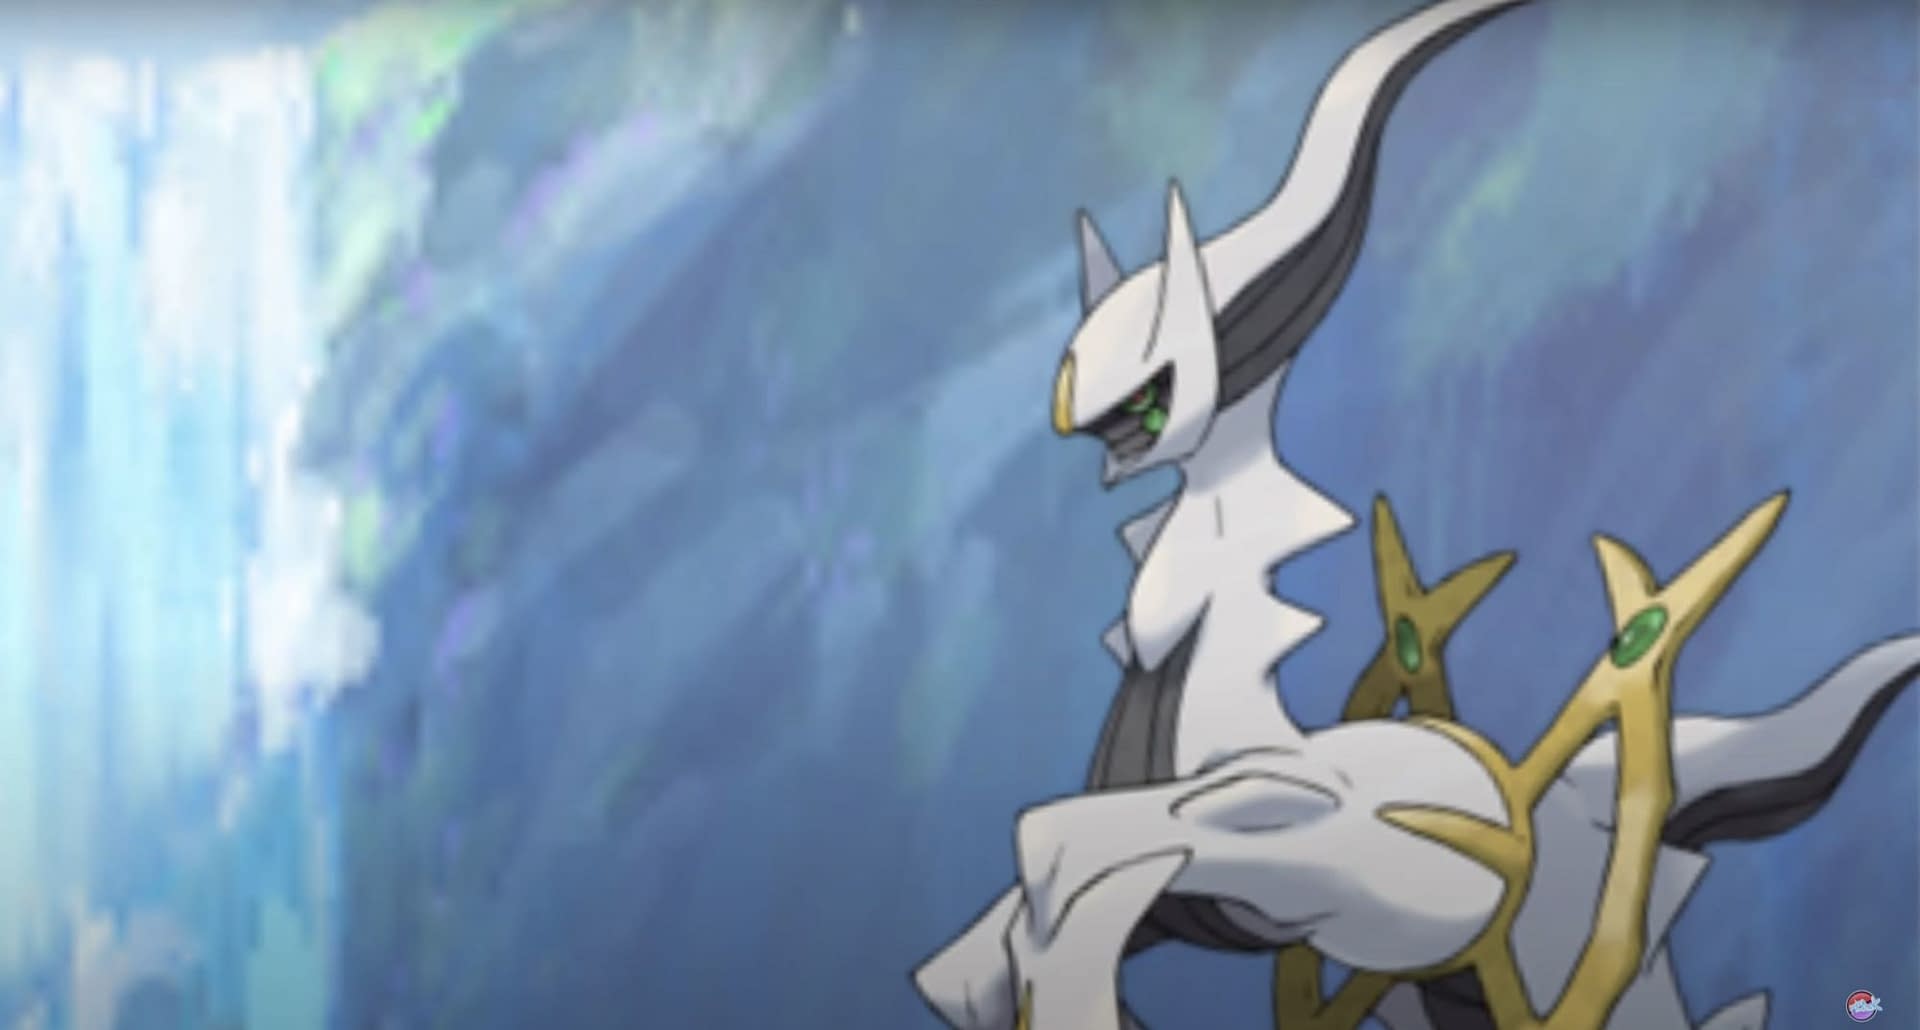 Is Pokémon GO Teasing Arceus In The New Load Screen?